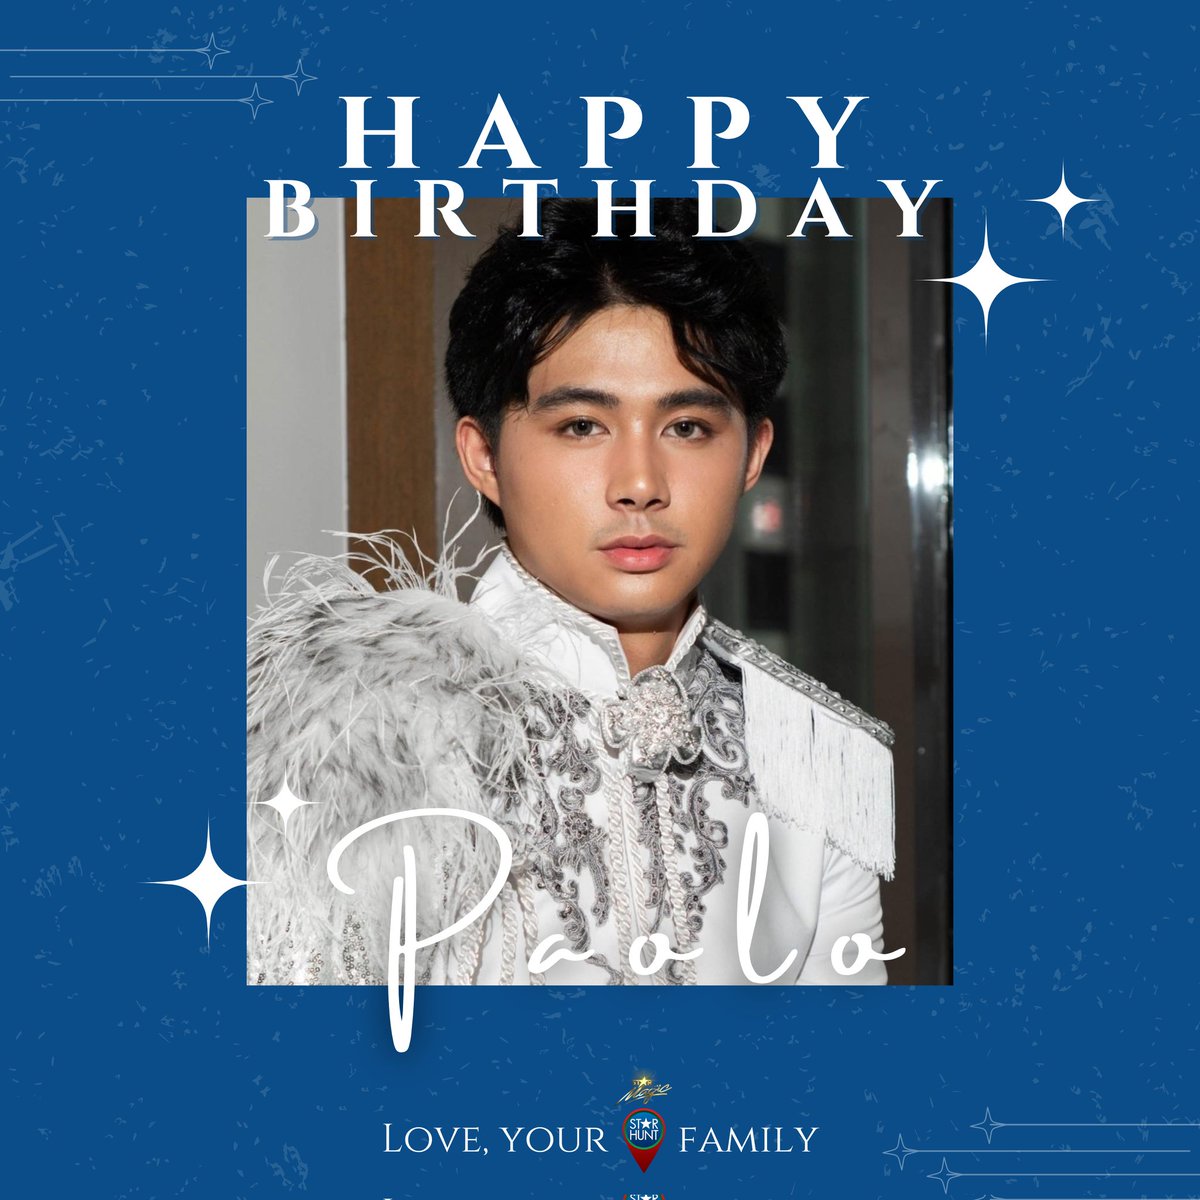 Happy birthday, Paolo (@paoloalcantara_)! Best wishes for a wonderful year! Enjoy your day and always keep on shining! ✨ Love, your Star Hunt family ❤️